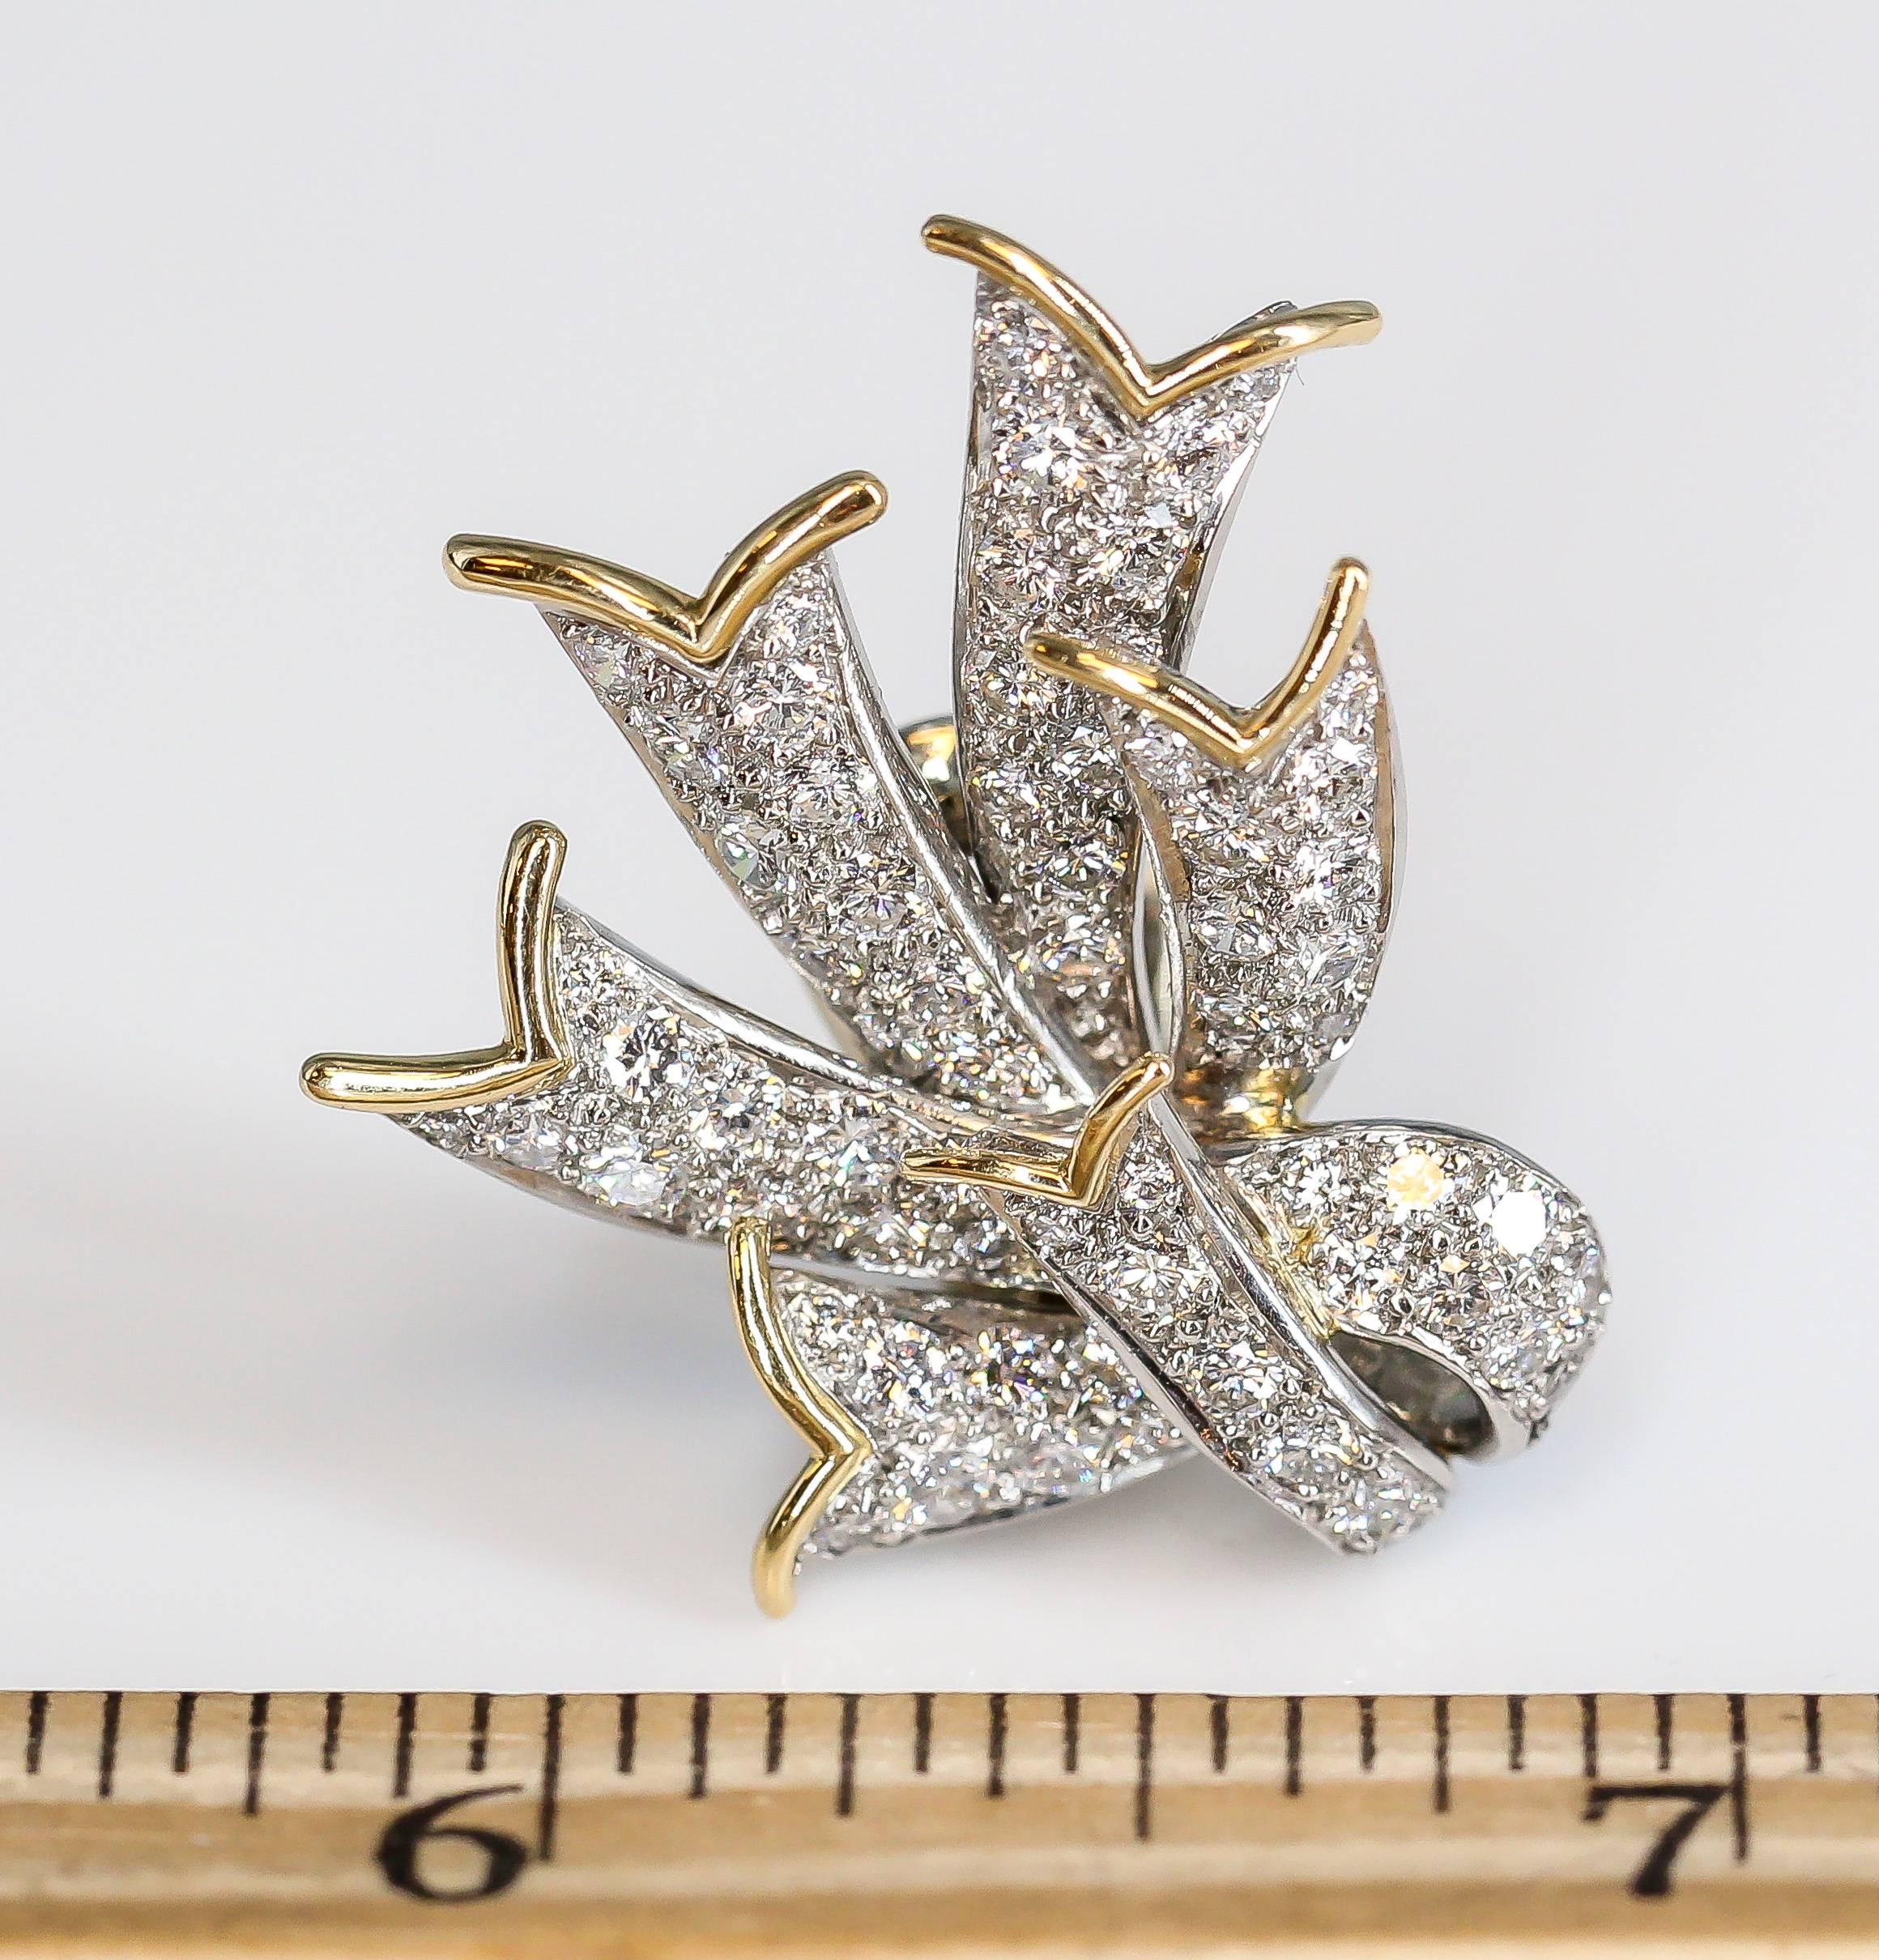 Elegant diamond, platinum and 18K yellow gold ear clips by Tiffany & Co. Schlumberger, circa 1970s. They feature high grade round brilliant cut diamonds throughout, with yellow gold accents, over a platinum setting. Approx. 5 carats of